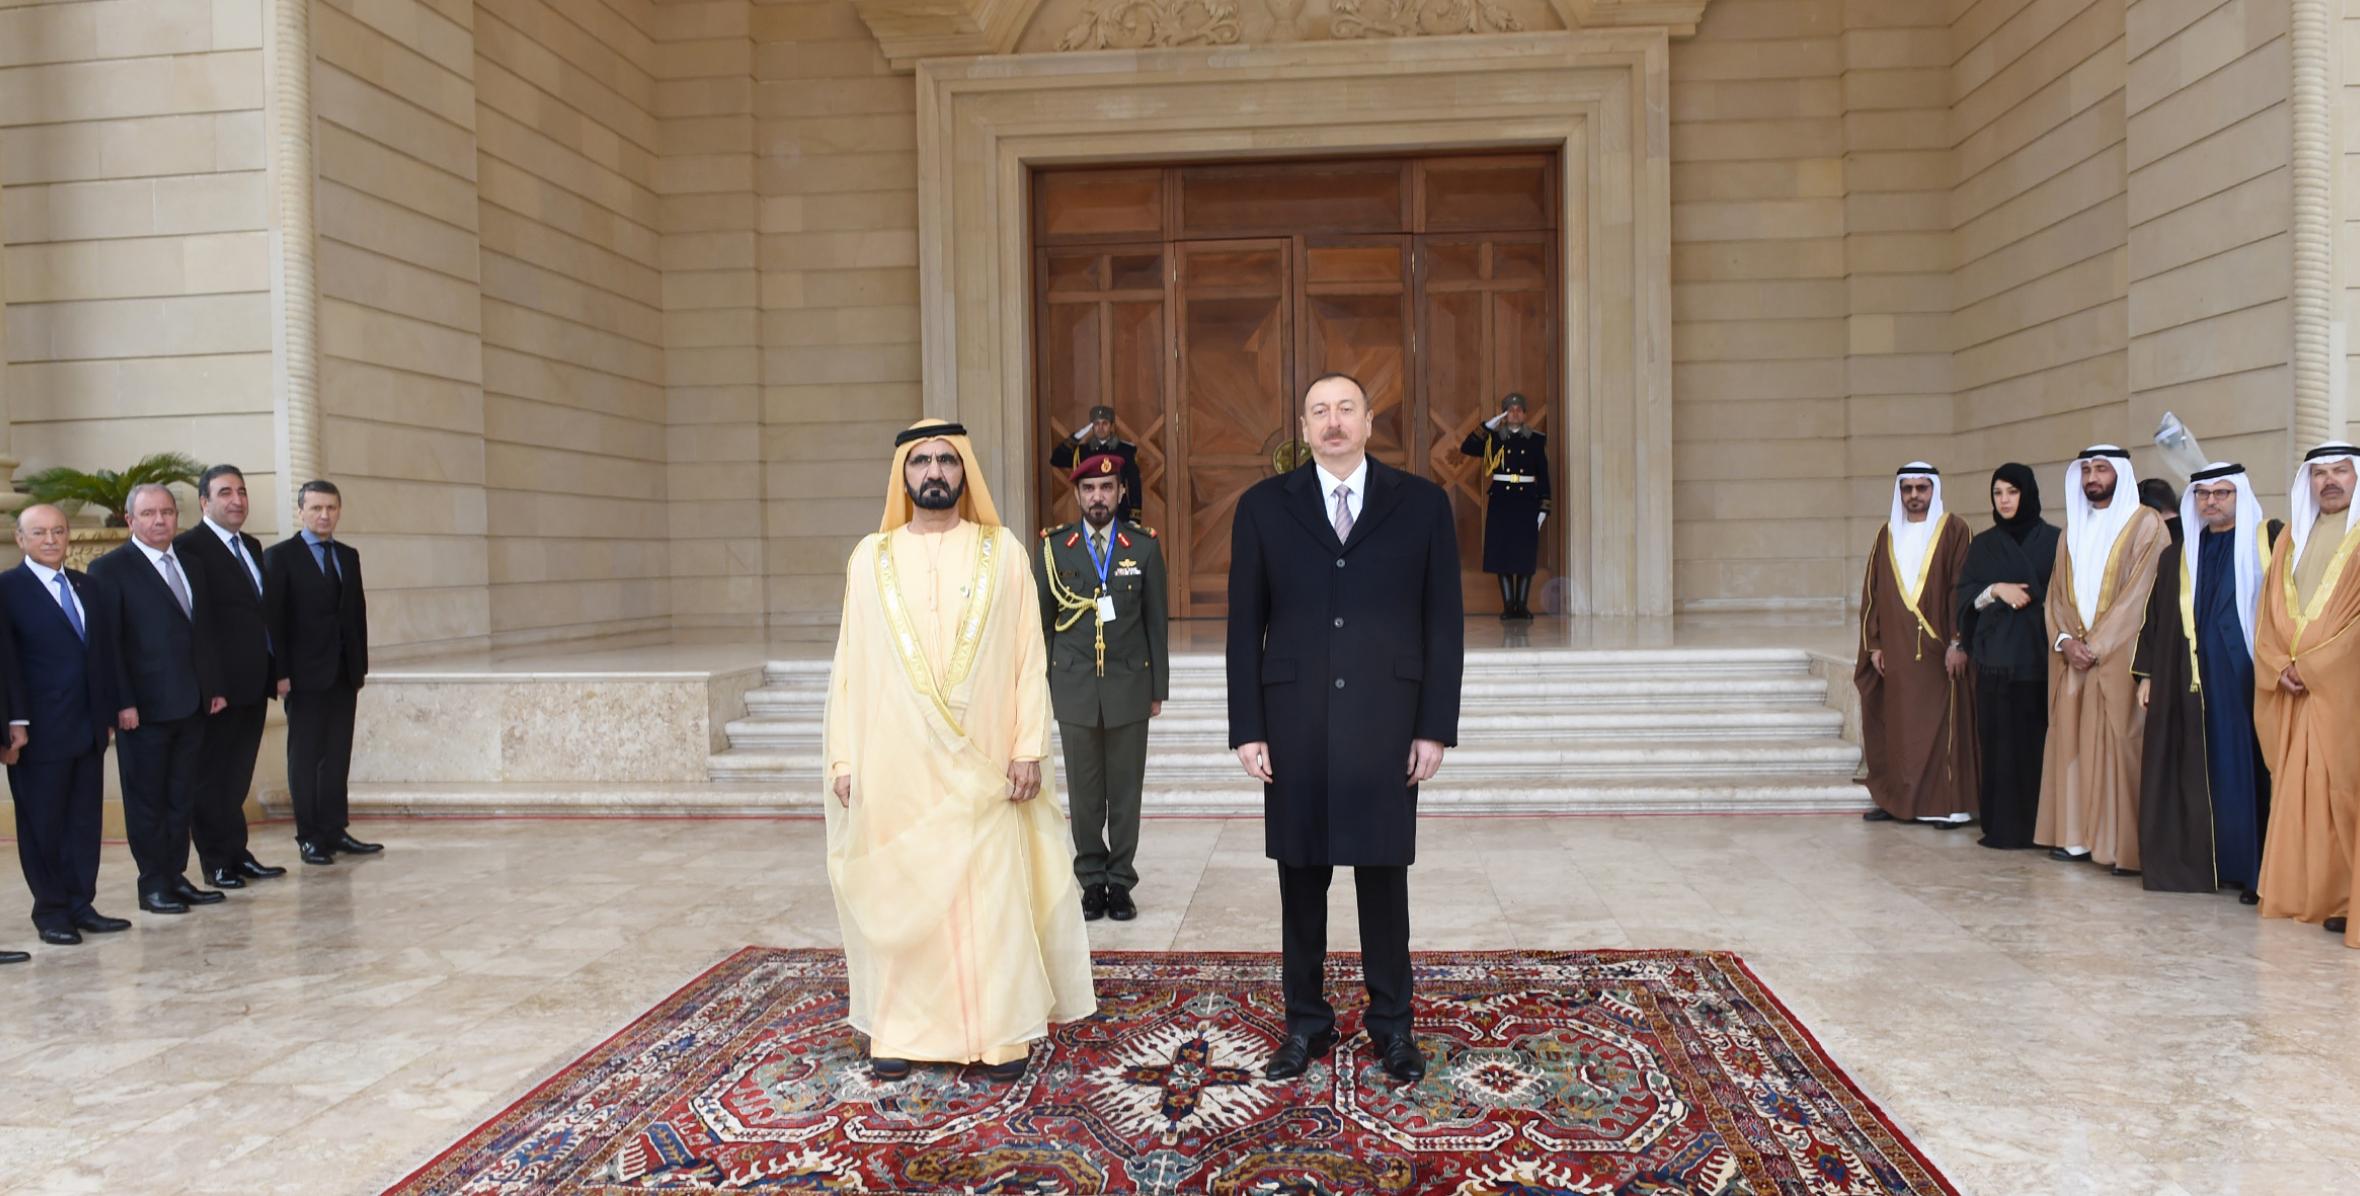 Official welcoming ceremony for Vice President, Prime Minister of the United Arab Emirates was held